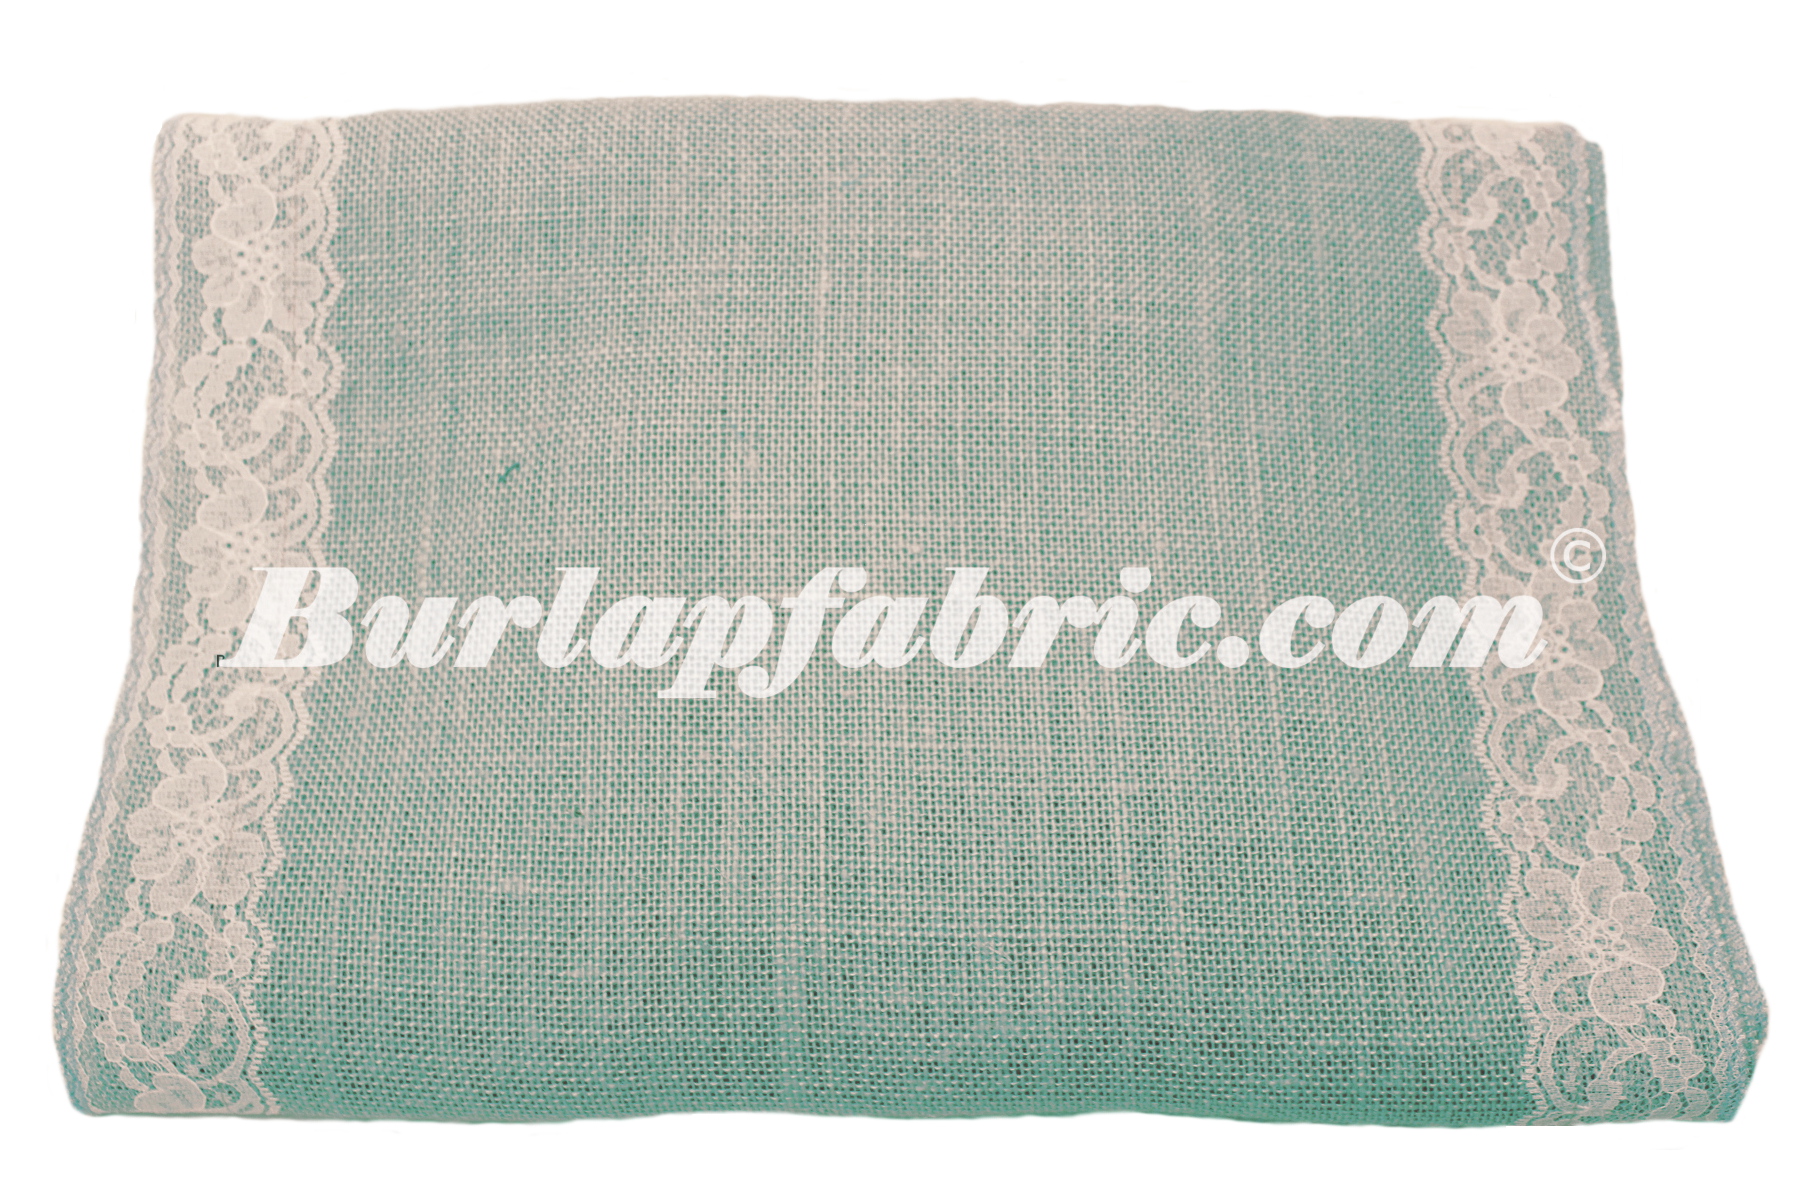 14" Light Blue Burlap Runner with 2" White Lace Borders